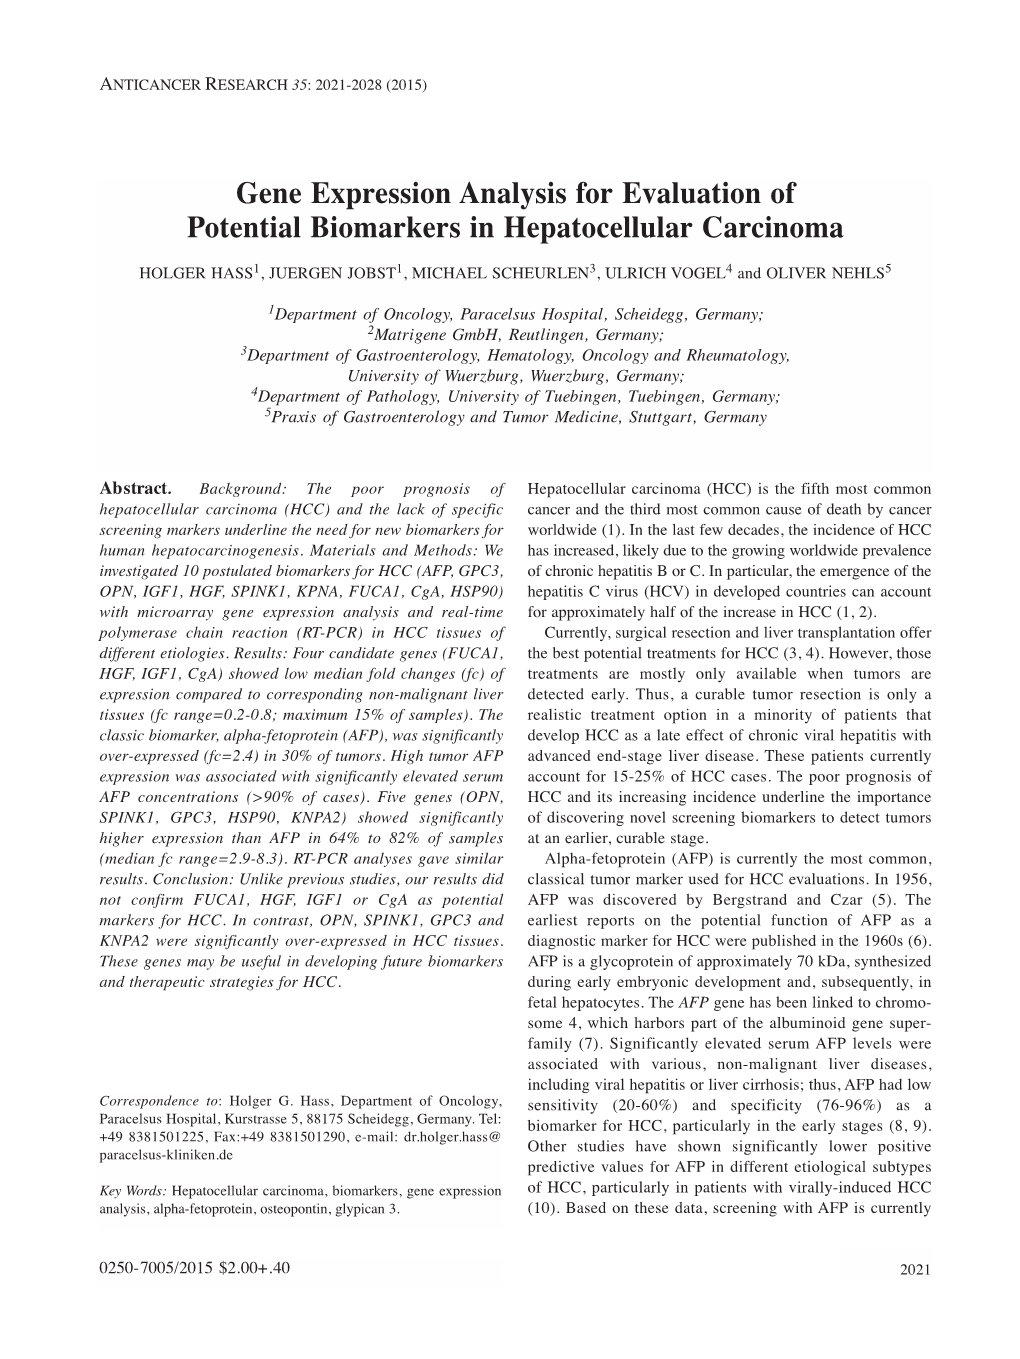 Gene Expression Analysis for Evaluation of Potential Biomarkers in Hepatocellular Carcinoma